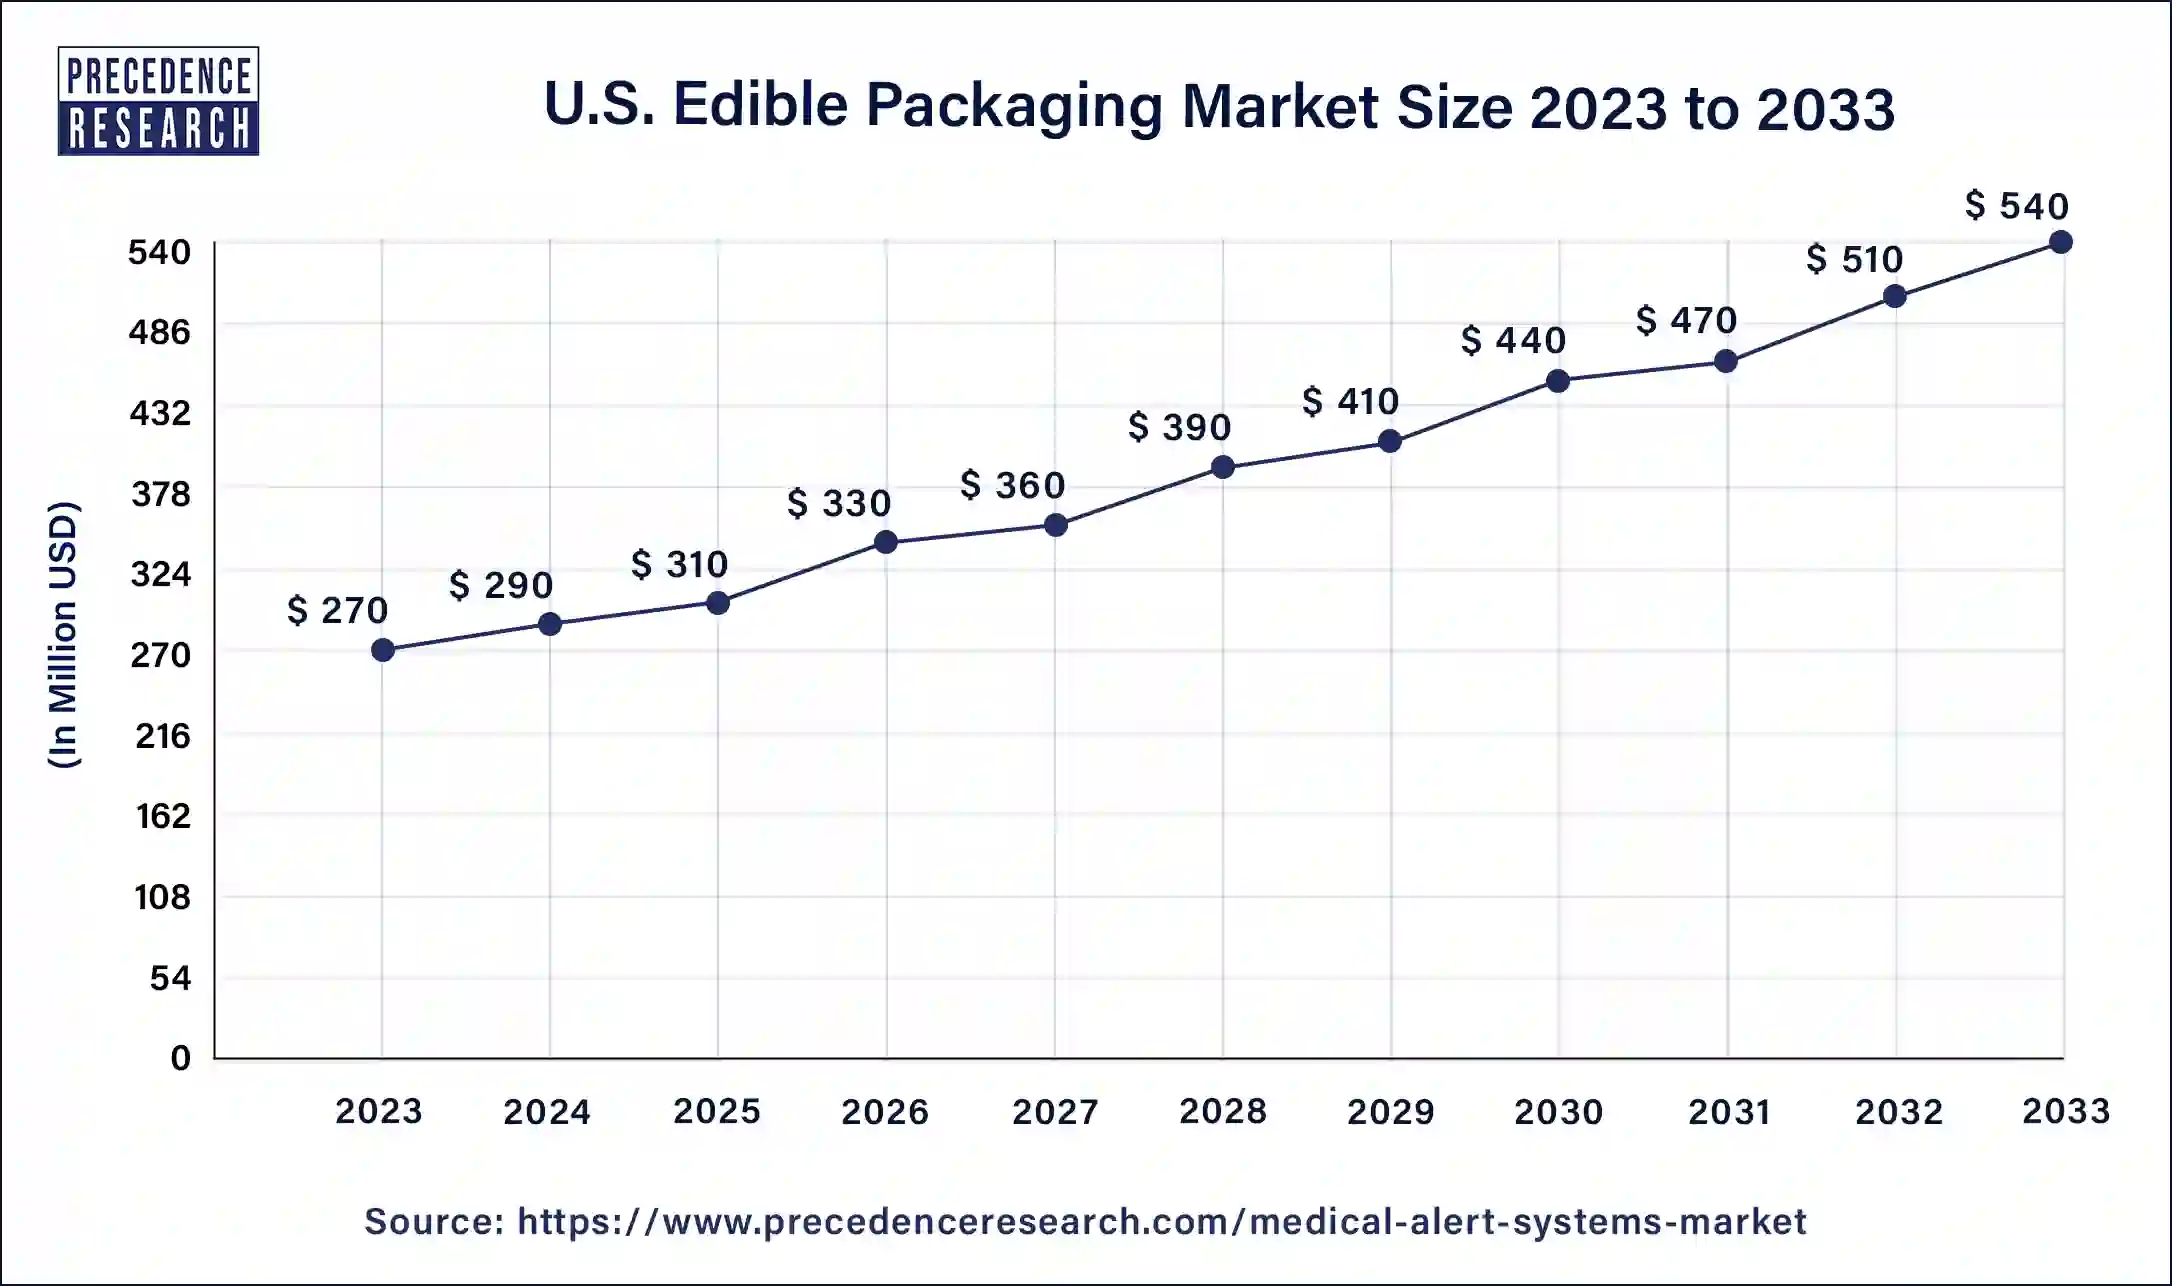 U.S. Edible Packaging Market Size 2024 to 2033